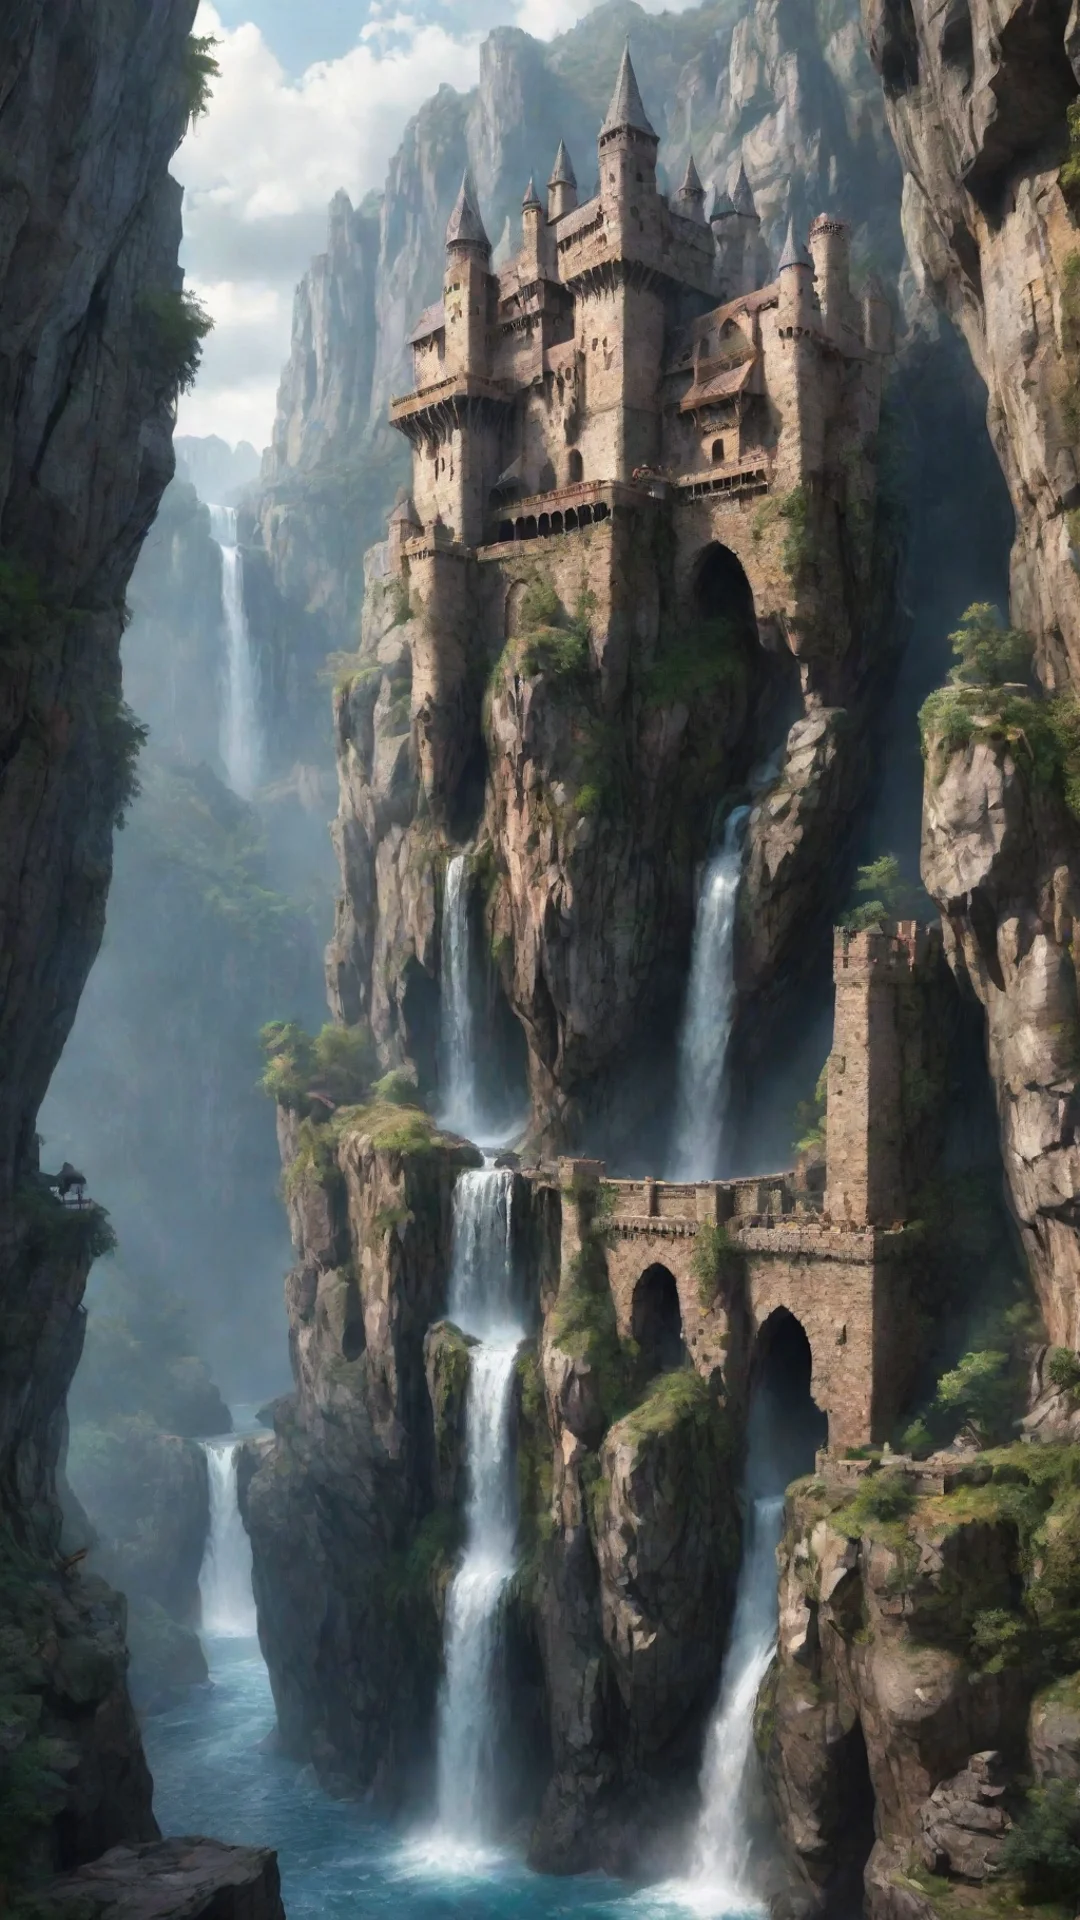 aiartstation art amazing castle on extreme cliff overhangs caves hd detailed realistic asthetic lovely waterfalls confident engaging wow 3 tall